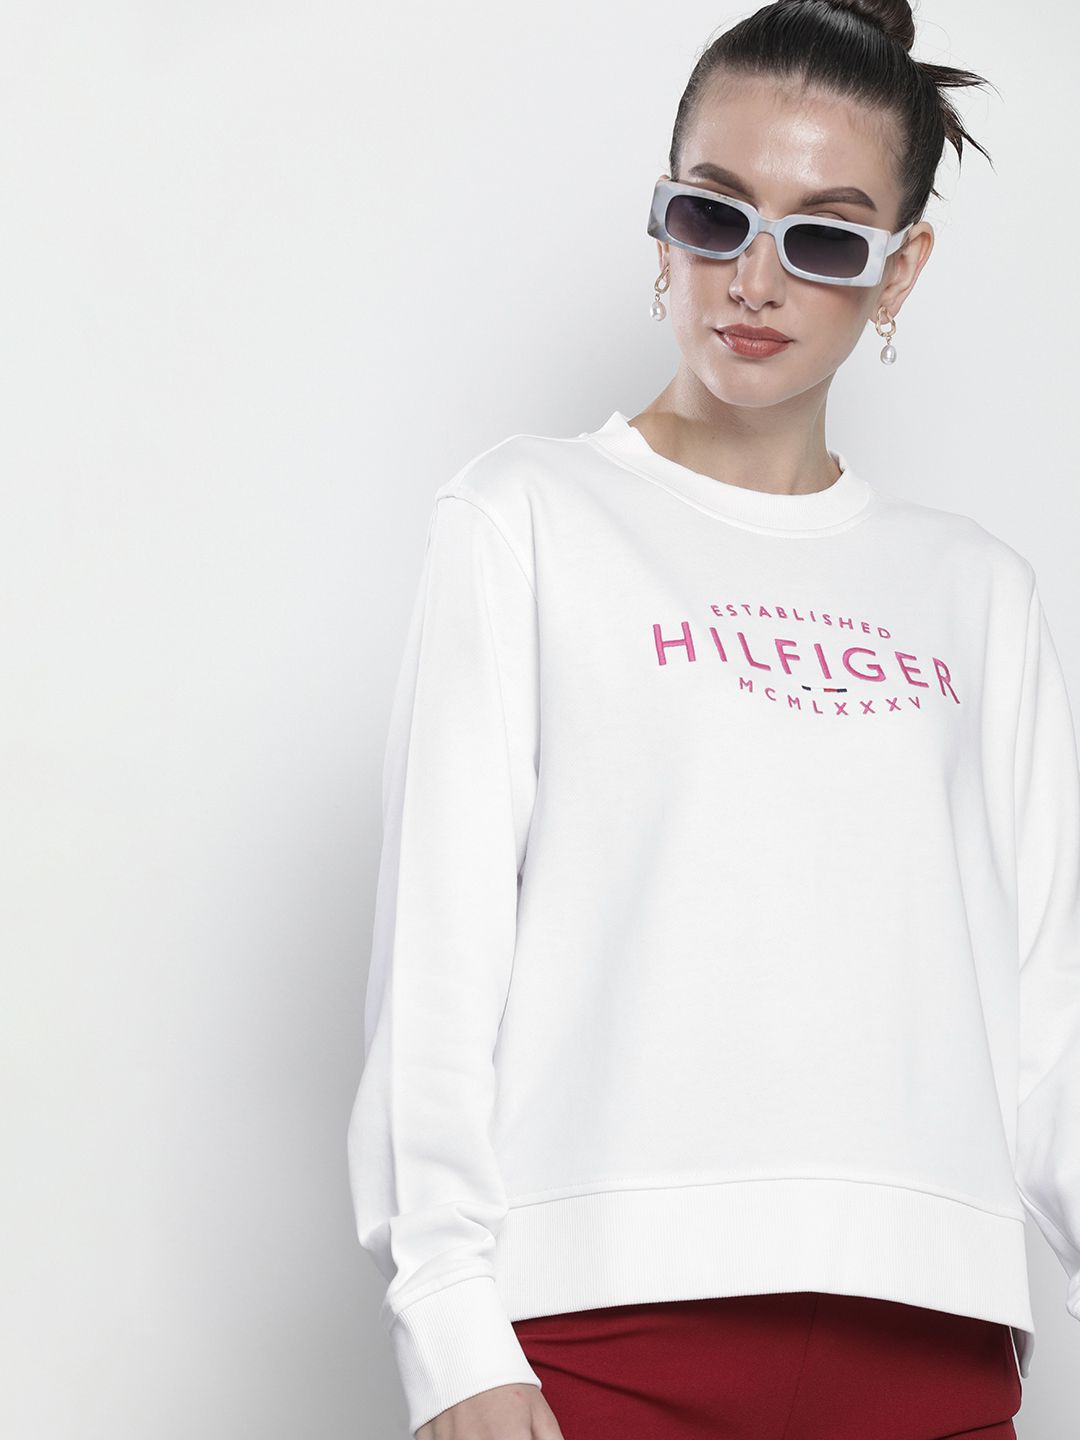 Tommy Hilfiger Women White & Pink Embroidered Sweatshirt Price in India